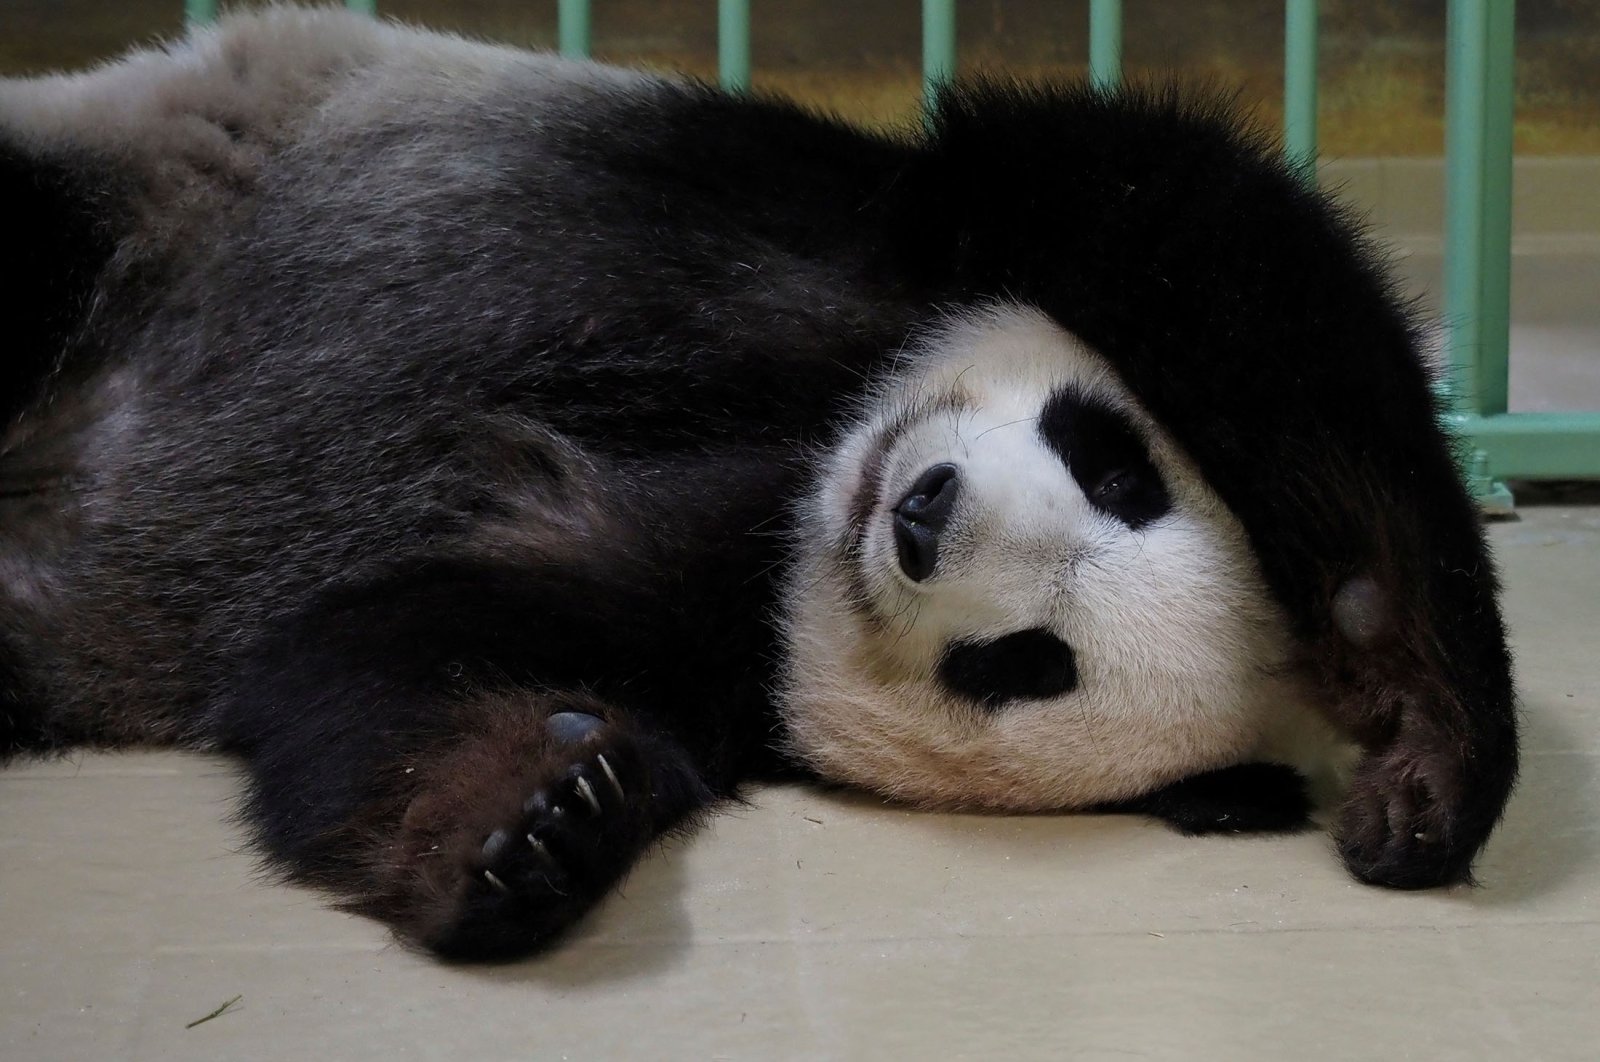 Pregnant female giant panda Huan Huan sleeps inside her enclosure prior to giving birth at Beauval Zoo in Saint-Aignan-sur-Cher, central France, Aug. 1, 2021. (AFP Photo)